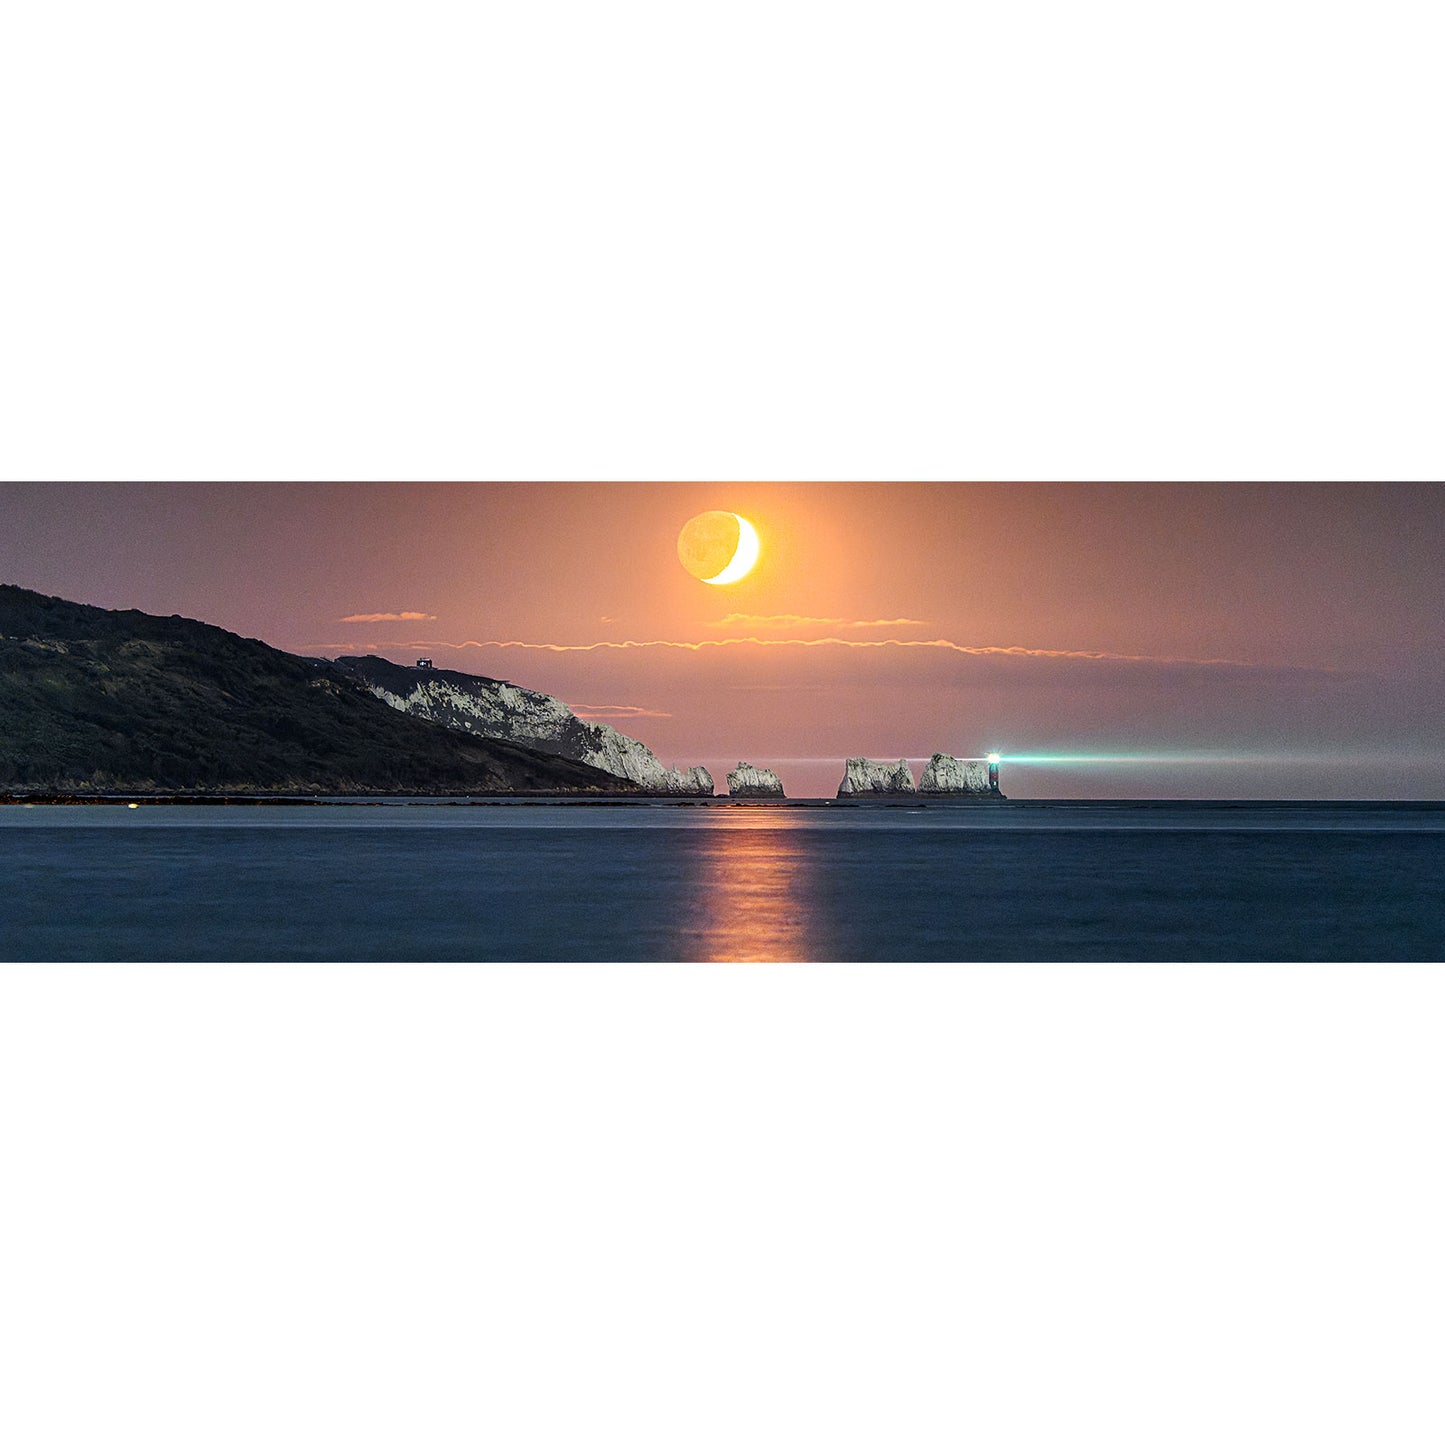 Crescent Moonset at The Needles - Available Light Photography